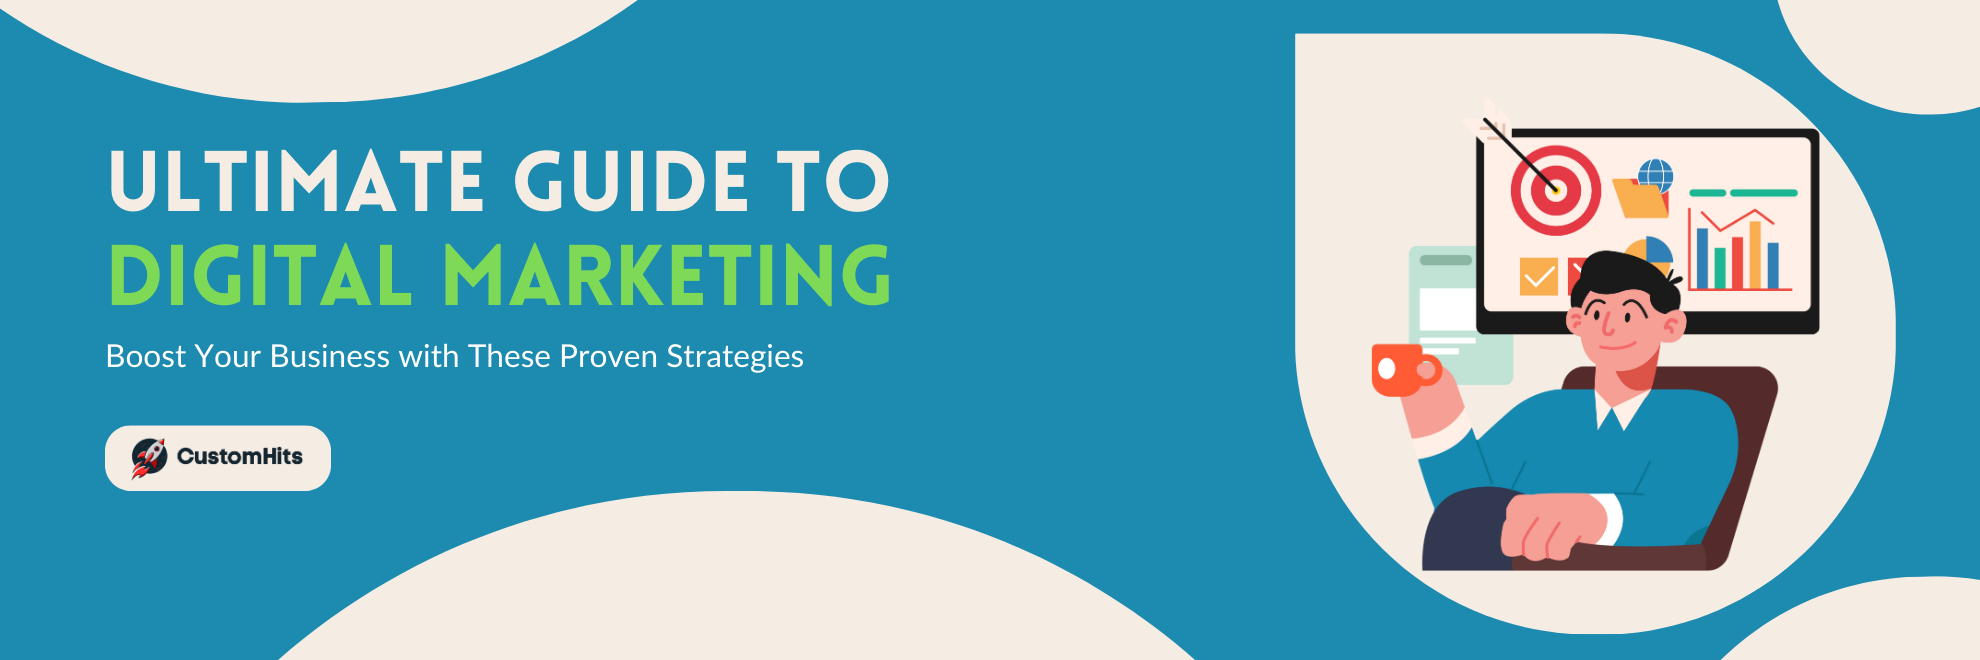 The Ultimate Guide to Digital Marketing: Boost Your Business with These Proven Strategies